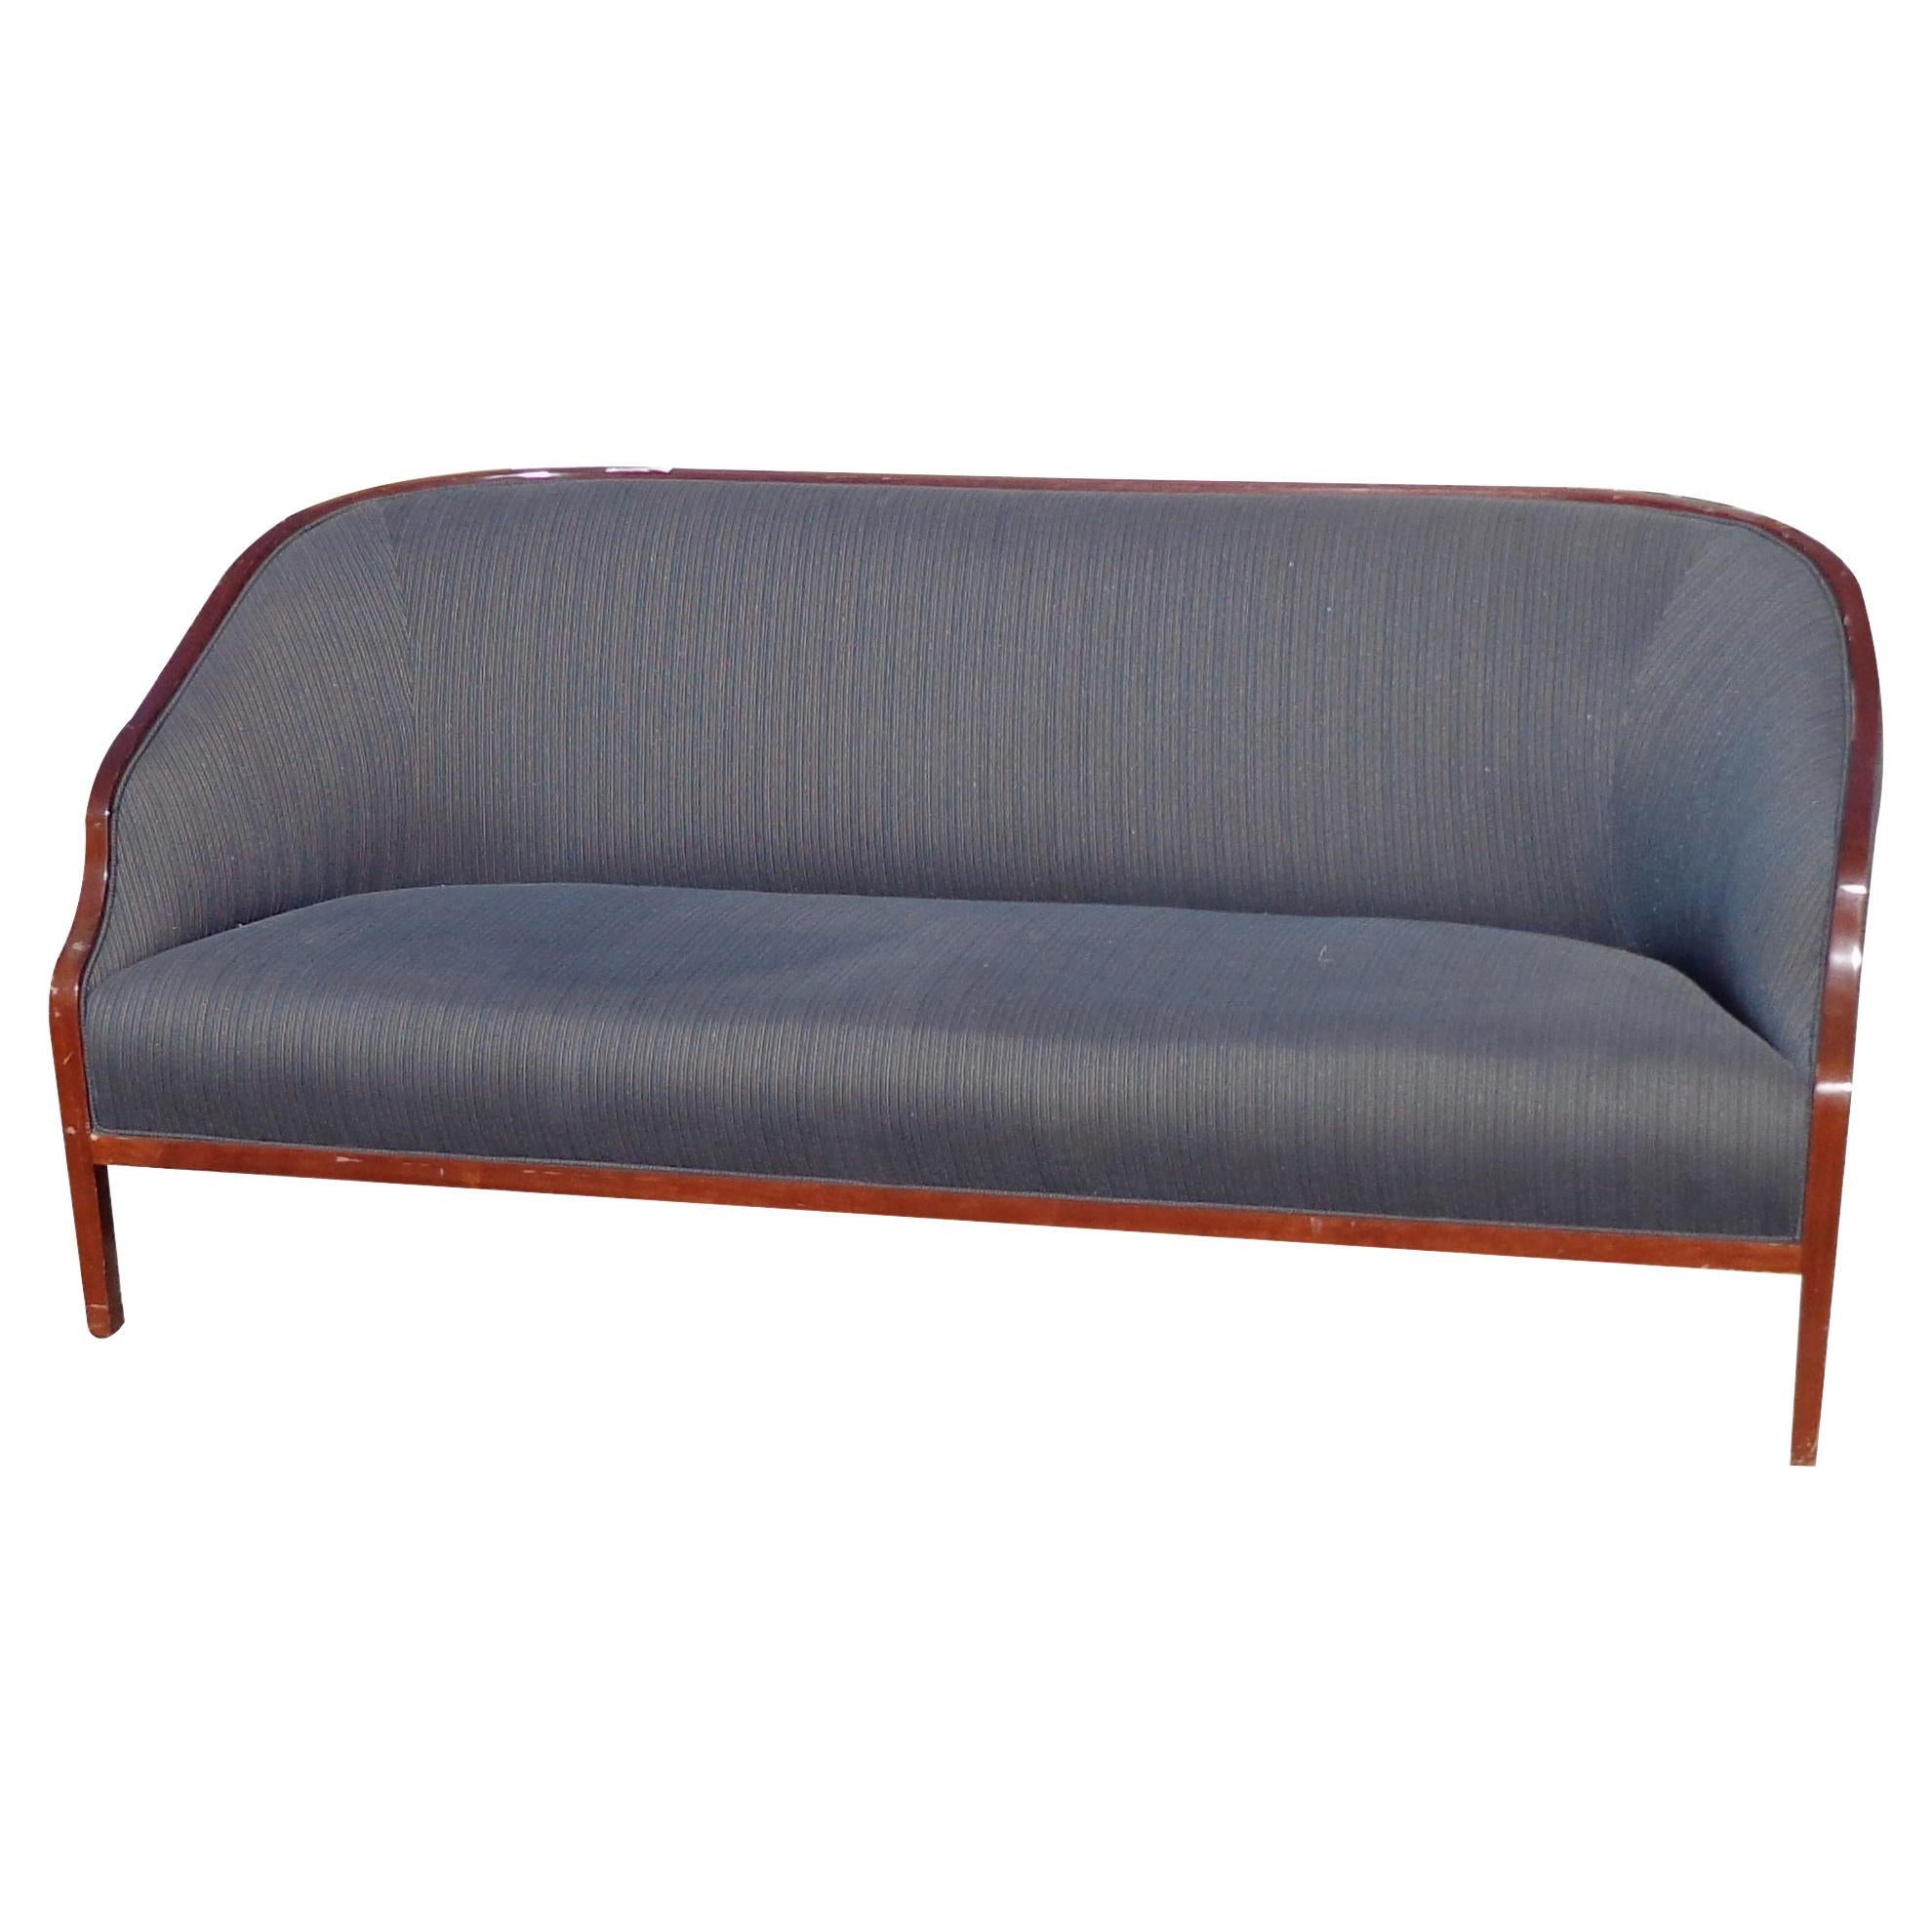 71? Ward Bennett Sofa for Geiger 


Ward Bennett
As a young man, Mr. Bennett undertook various studies in the Fine Arts including drawing at the Porto Romano school in Florence and in Paris with Brancusi, painting in New York with Hans Hoffman